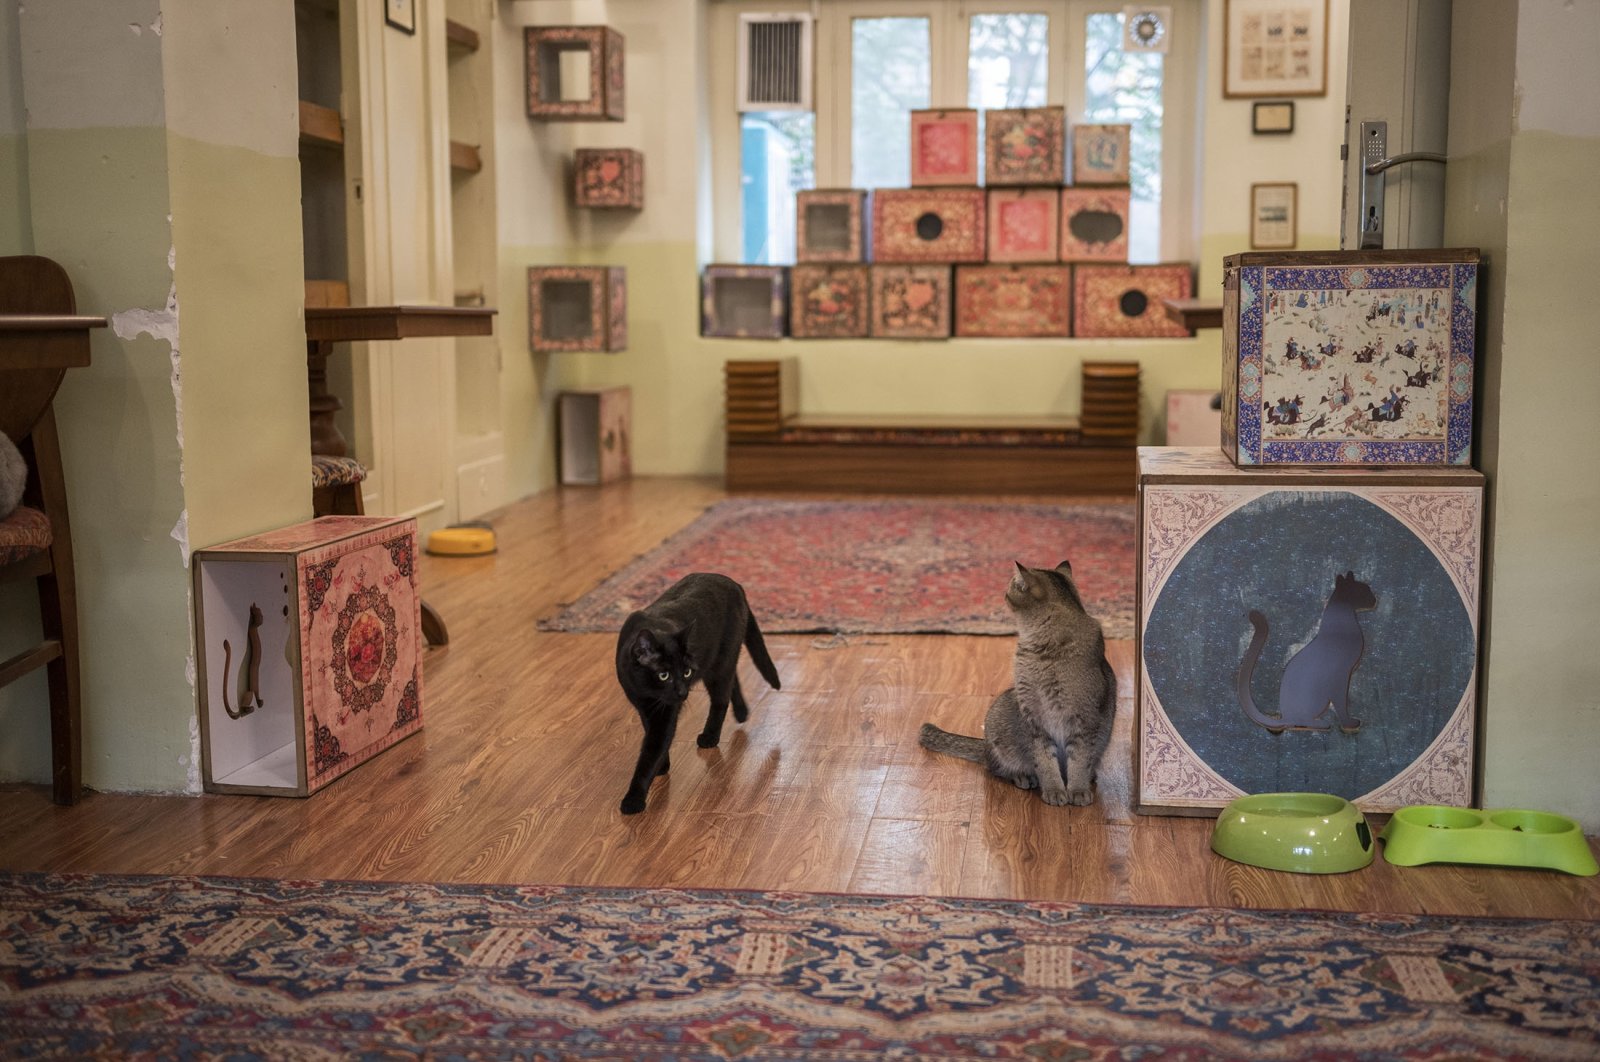 No less than 27 cats, which roam exhibition spaces, live at the Museum of Persian Cats, in Tehran, Iran. (dpa Photo)